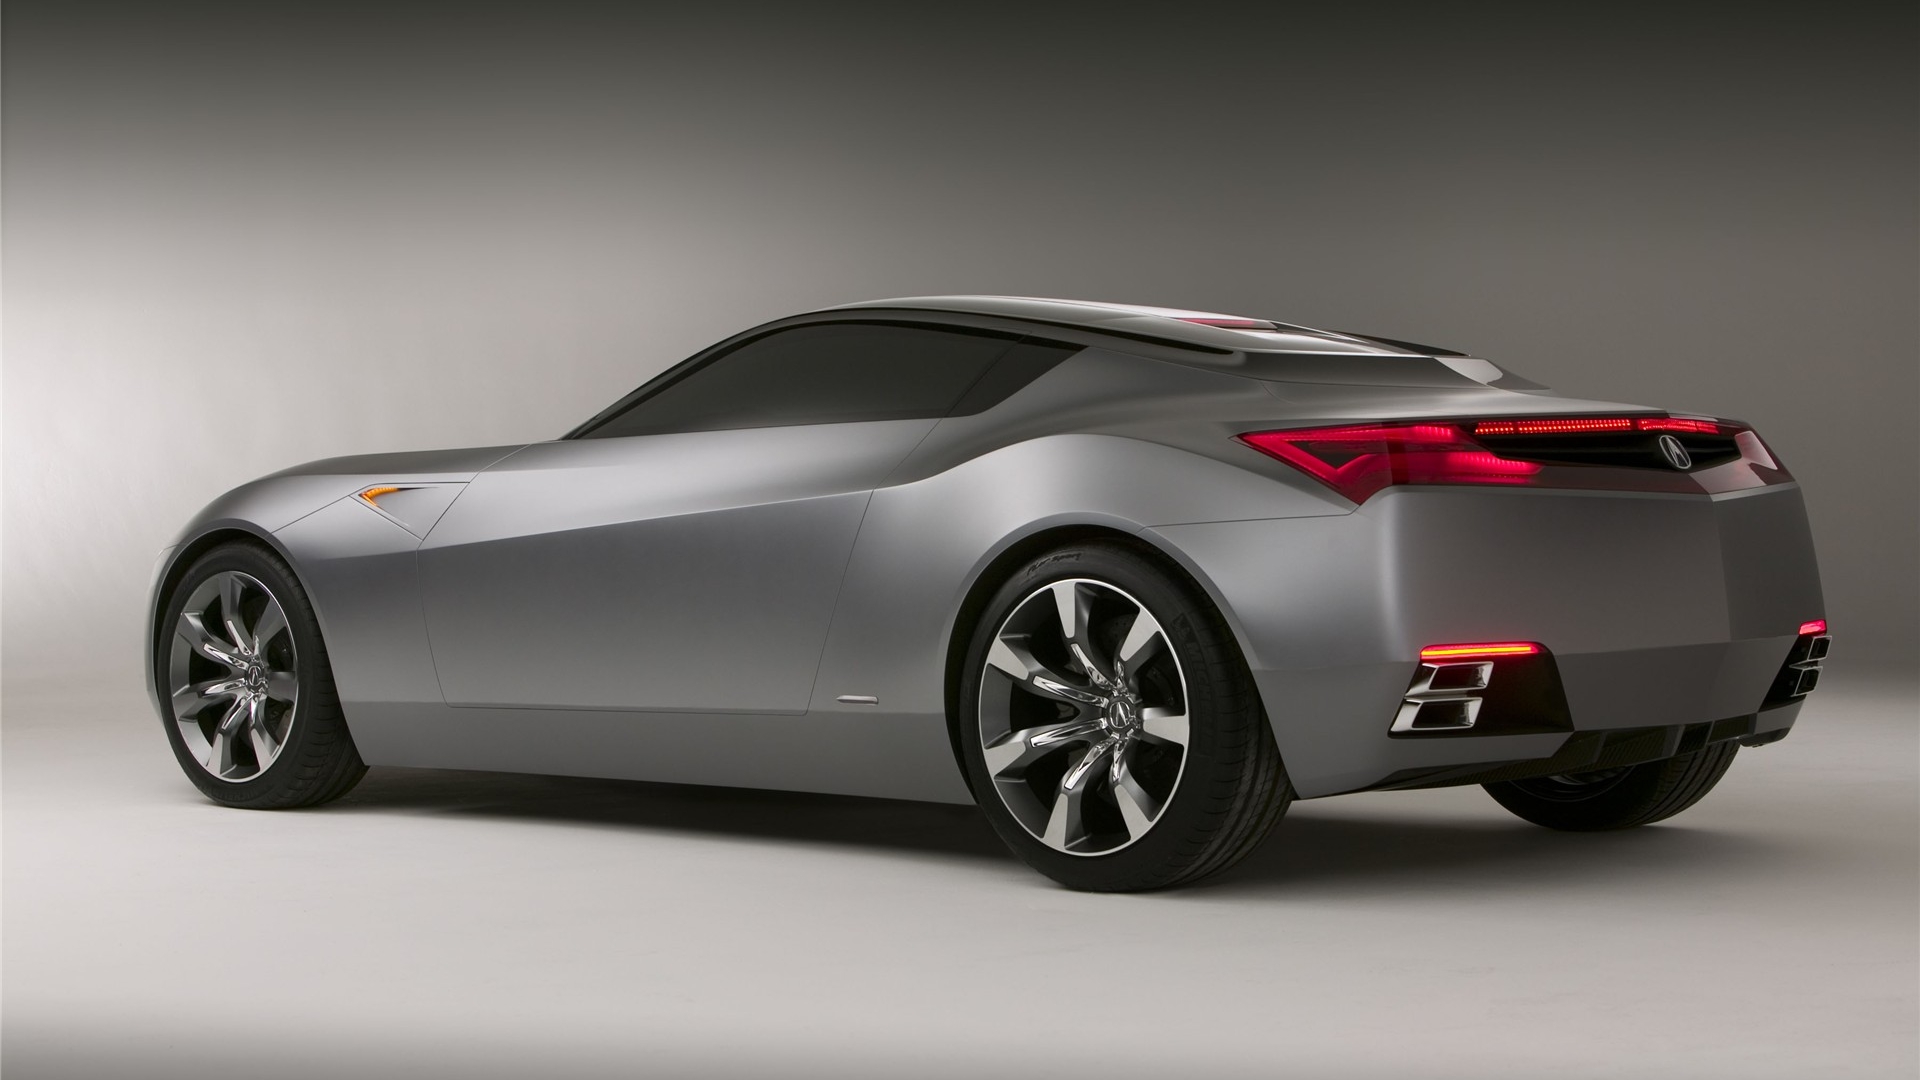 Acura Advanced Sedan Concept showcased amidst a scenic backdrop; a stylish and sleek vehicle evoking elegance and power.